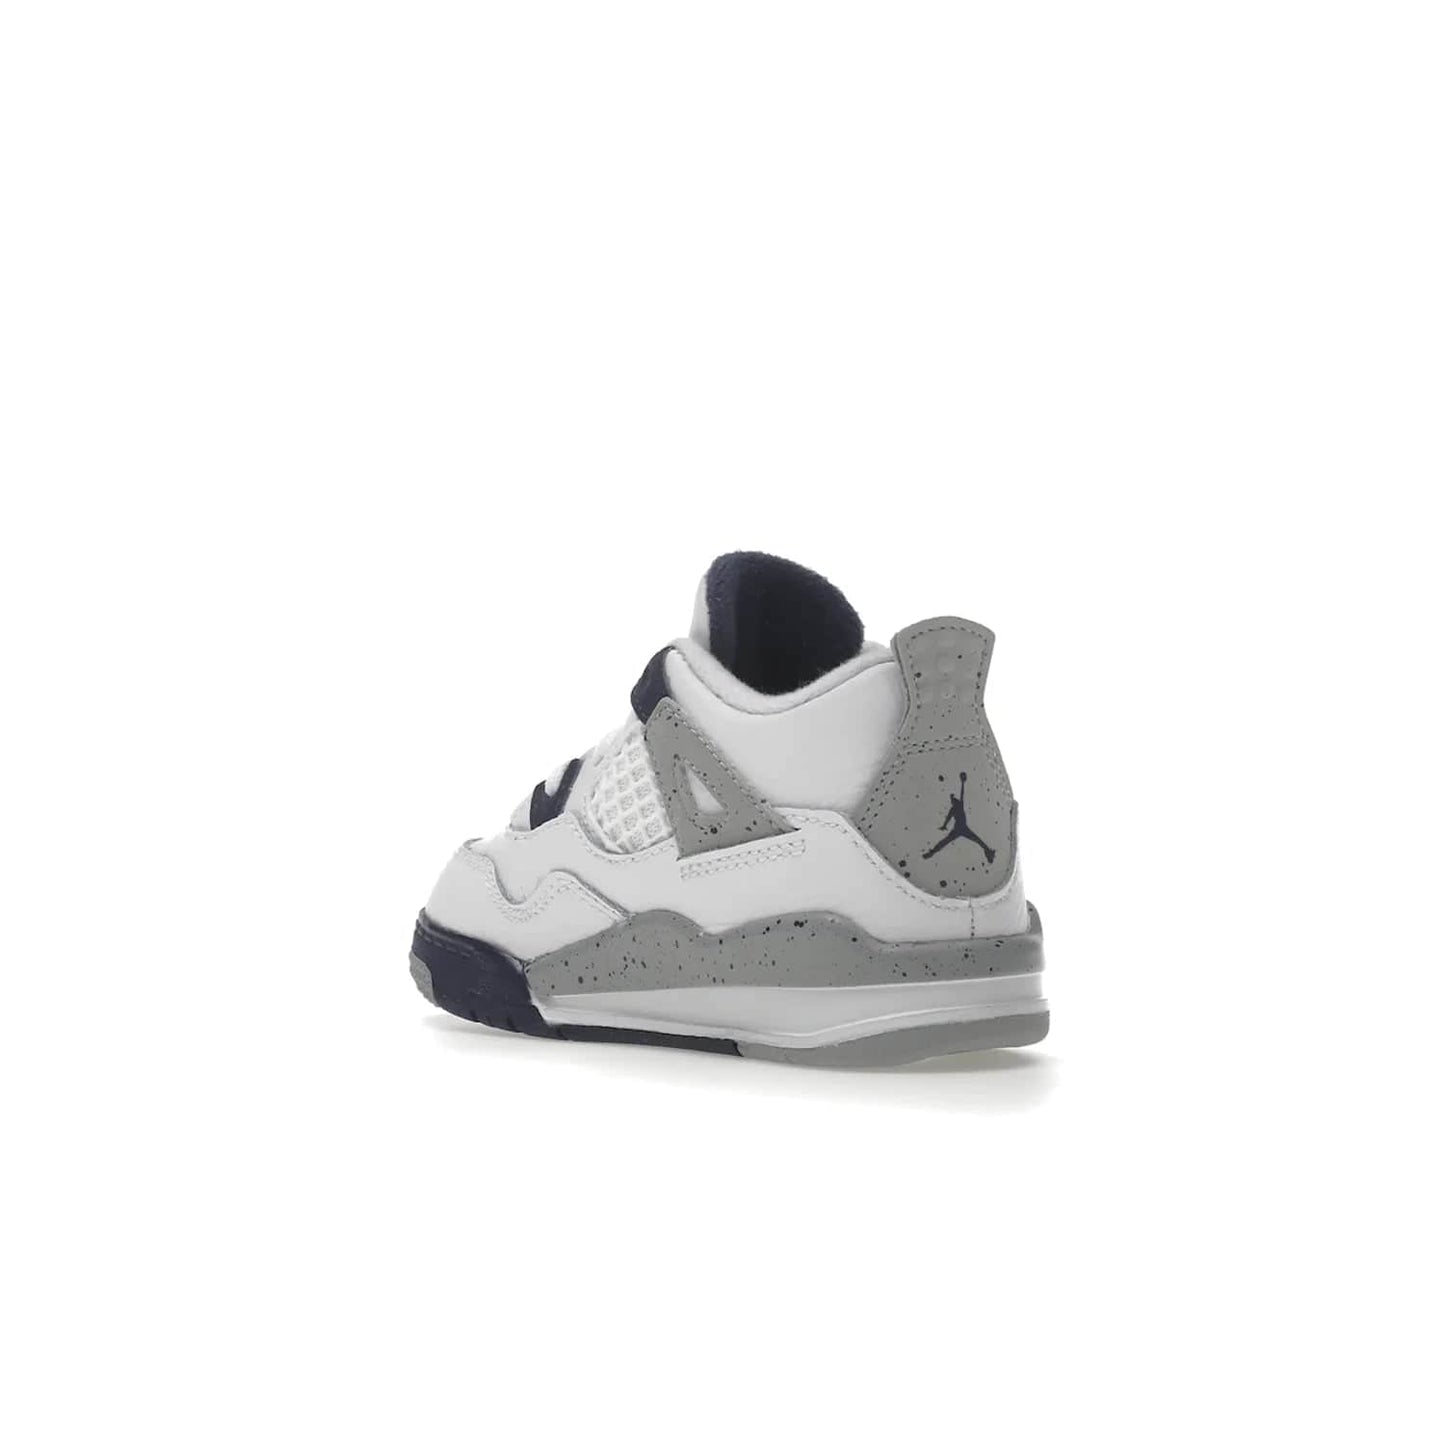 Jordan 4 Retro Midnight Navy (TD) - Image 24 - Only at www.BallersClubKickz.com - Introducing the Jordan 4 Retro Midnight Navy (TD) for kids. White leather upper with navy and grey accents plus fire red detailing. Perfect for everyday wear. Get yours before they sell out.